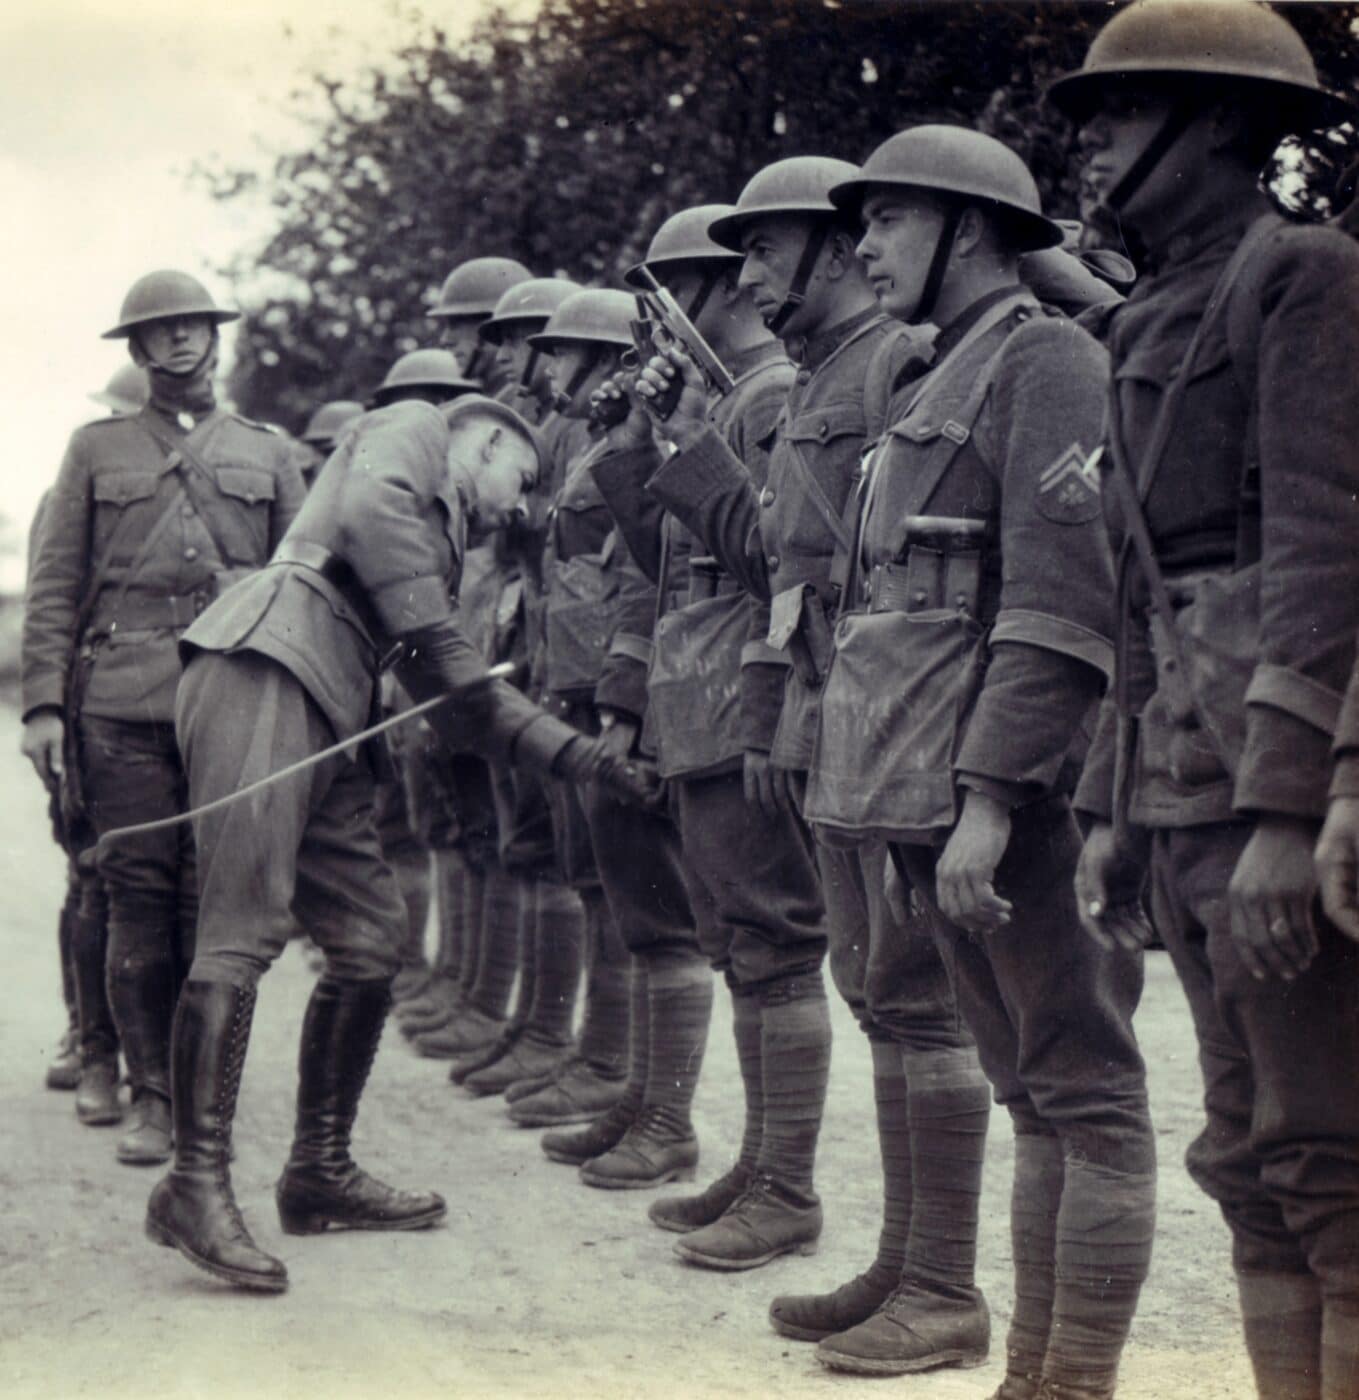 Men of the 1st Battalion of the U.S. Signal Corps present arms for inspection in France, May 1918.